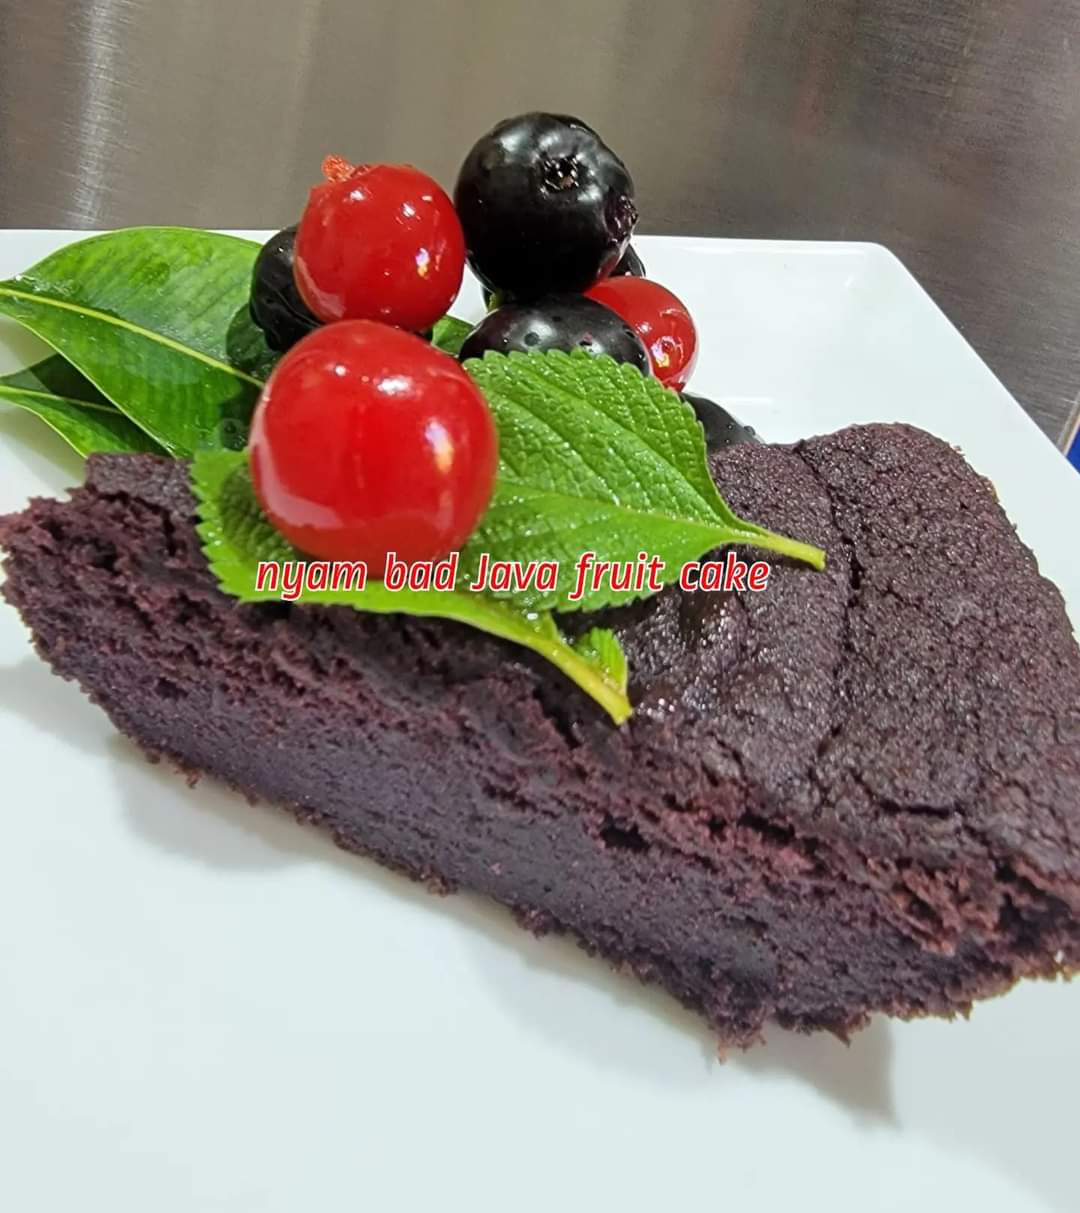 Nyam Bad Java Plum Fruit Cake 1lb - Donna Gowe (DHL SHIPPING REQUIRED)